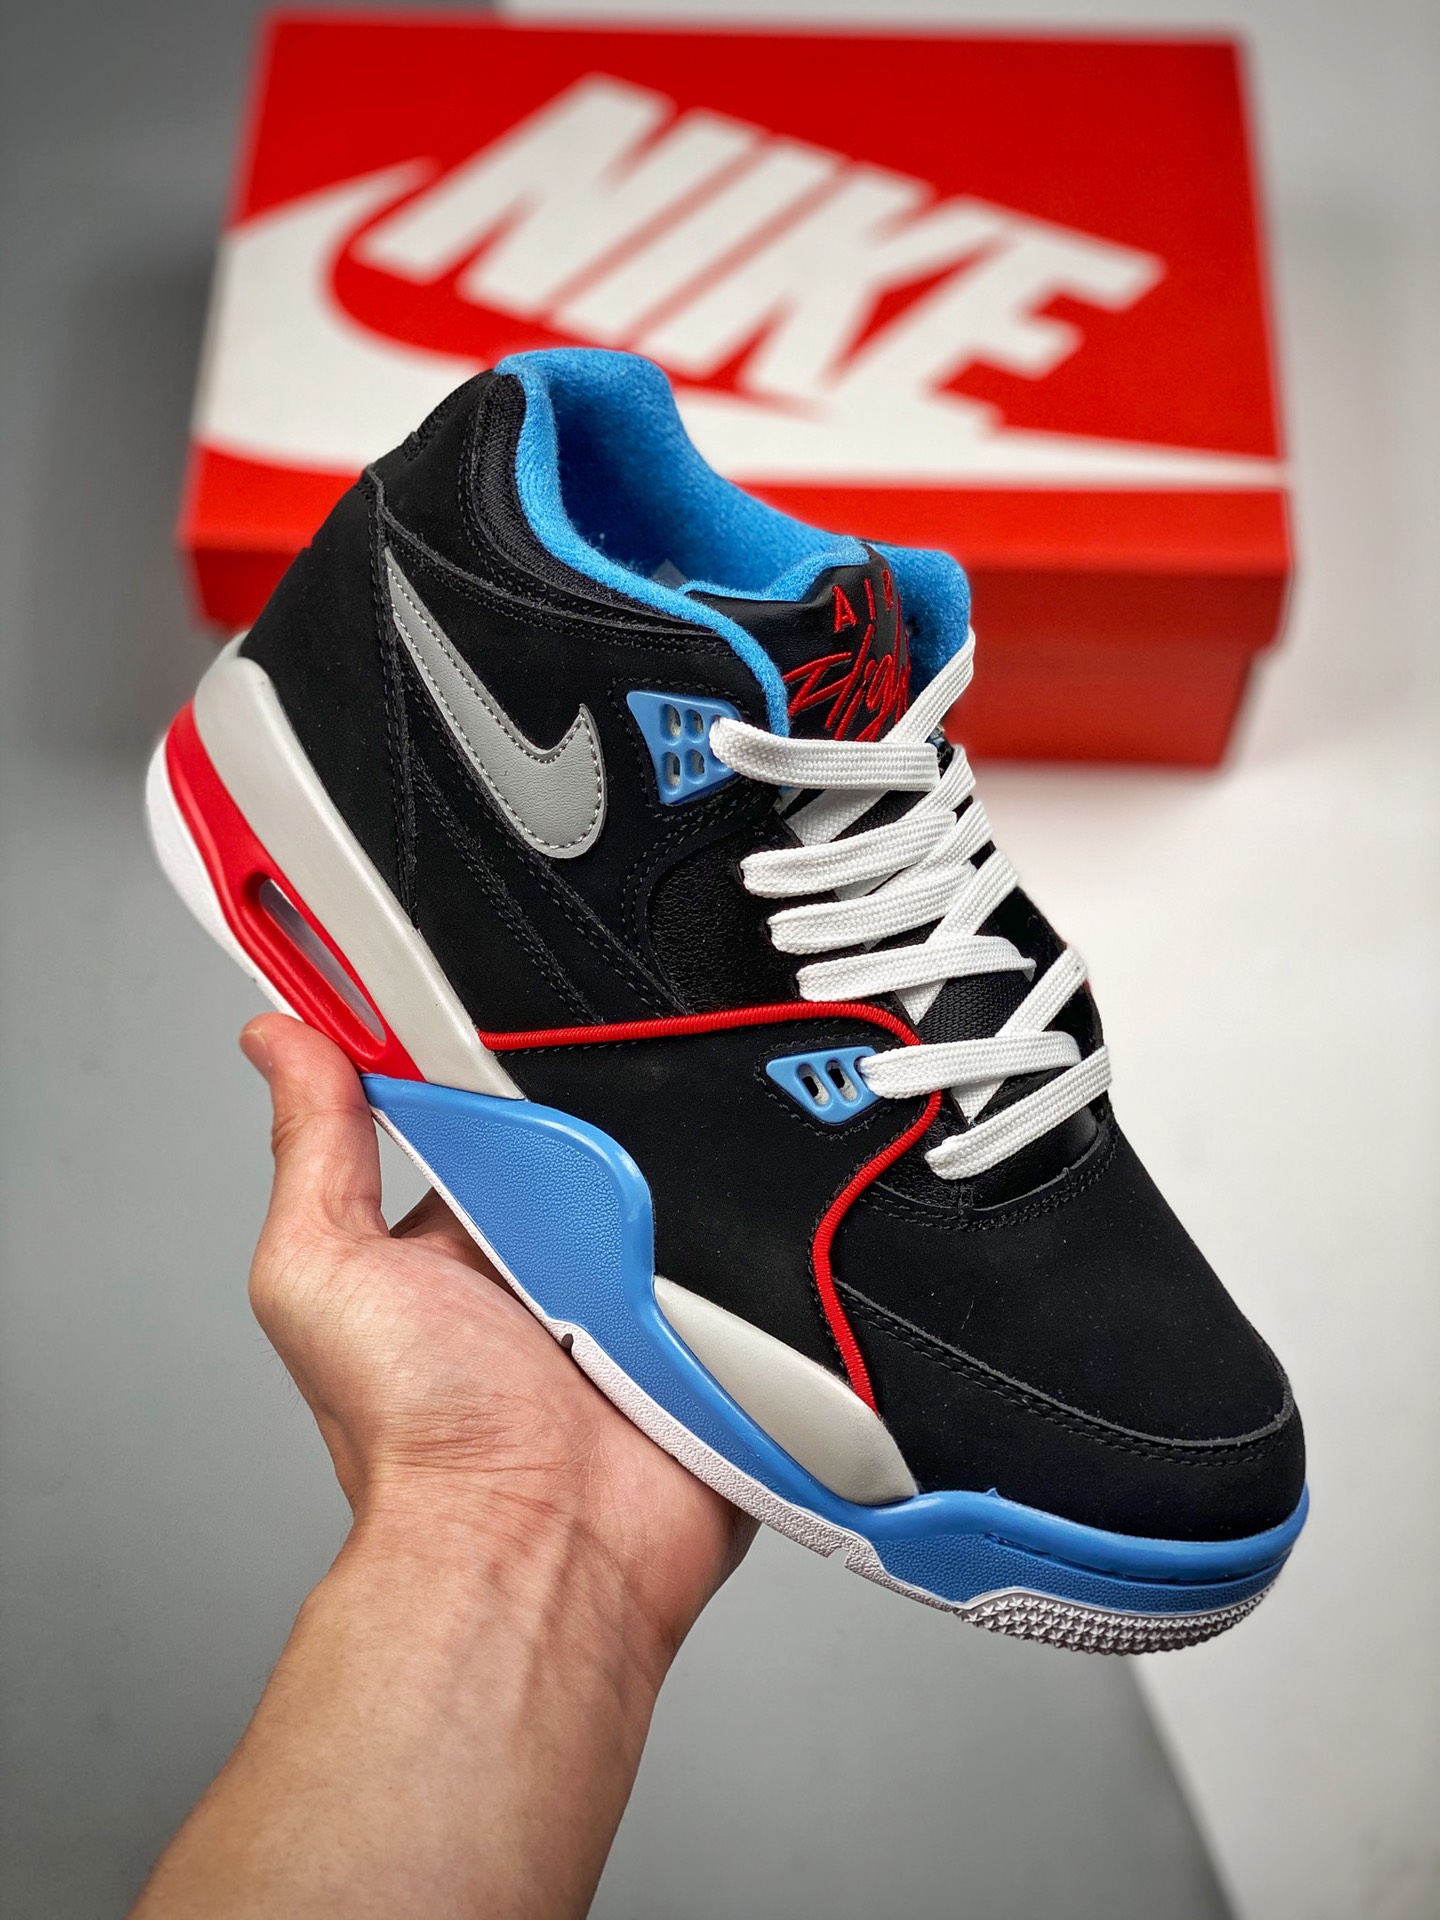 Nike Air Flight 89 "Chicago" Black Red Blue Shoes